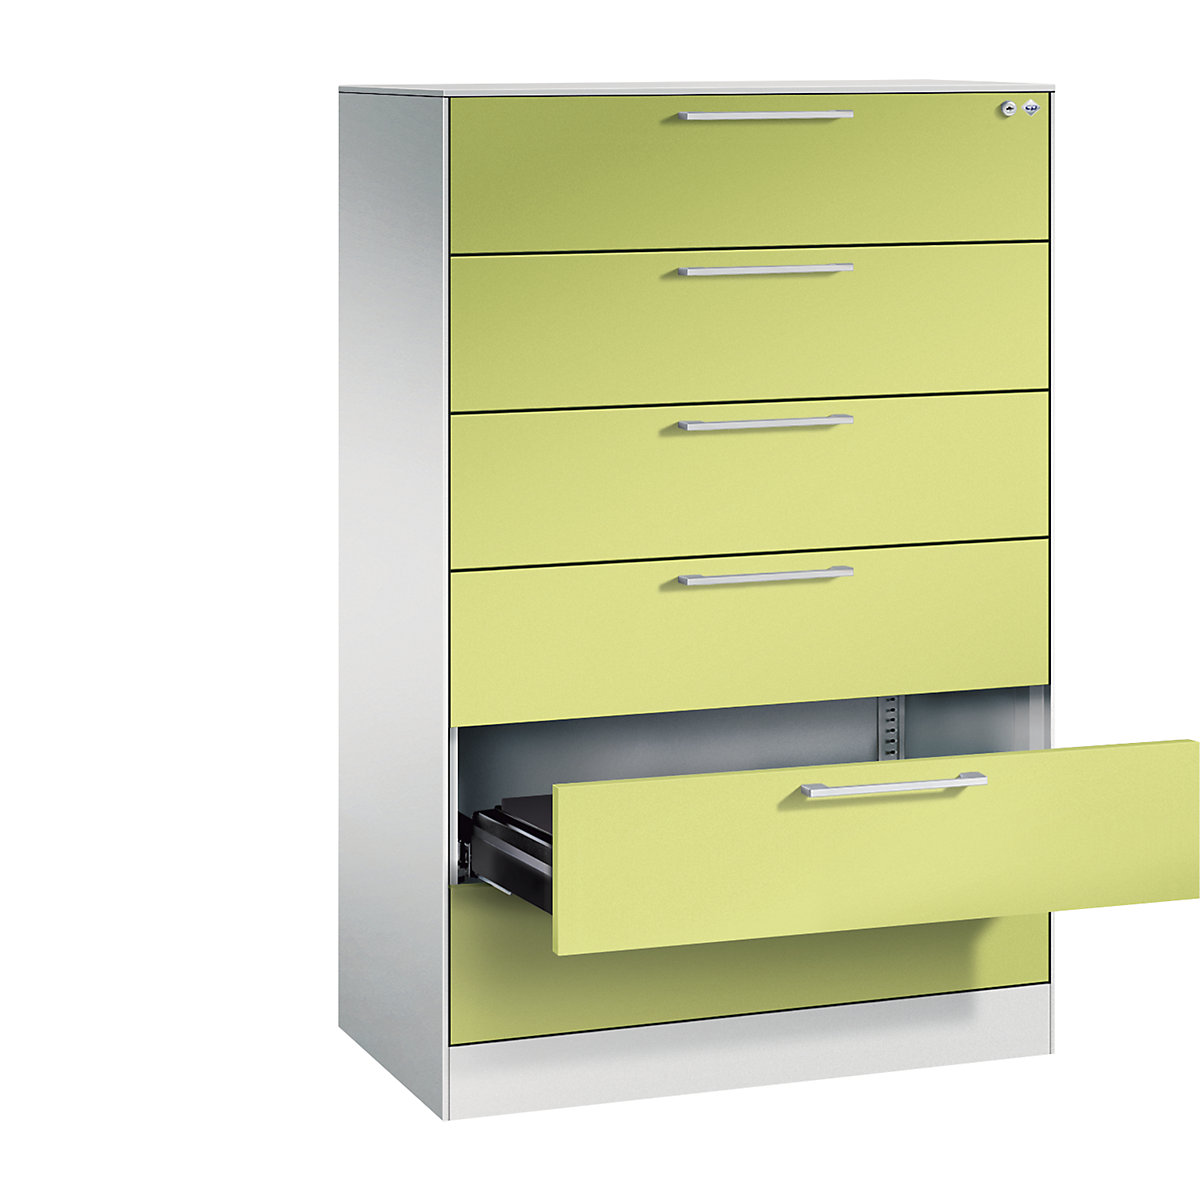 ASISTO card file cabinet – C+P, height 1292 mm, with 6 drawers, A5 landscape, light grey/viridian green-10